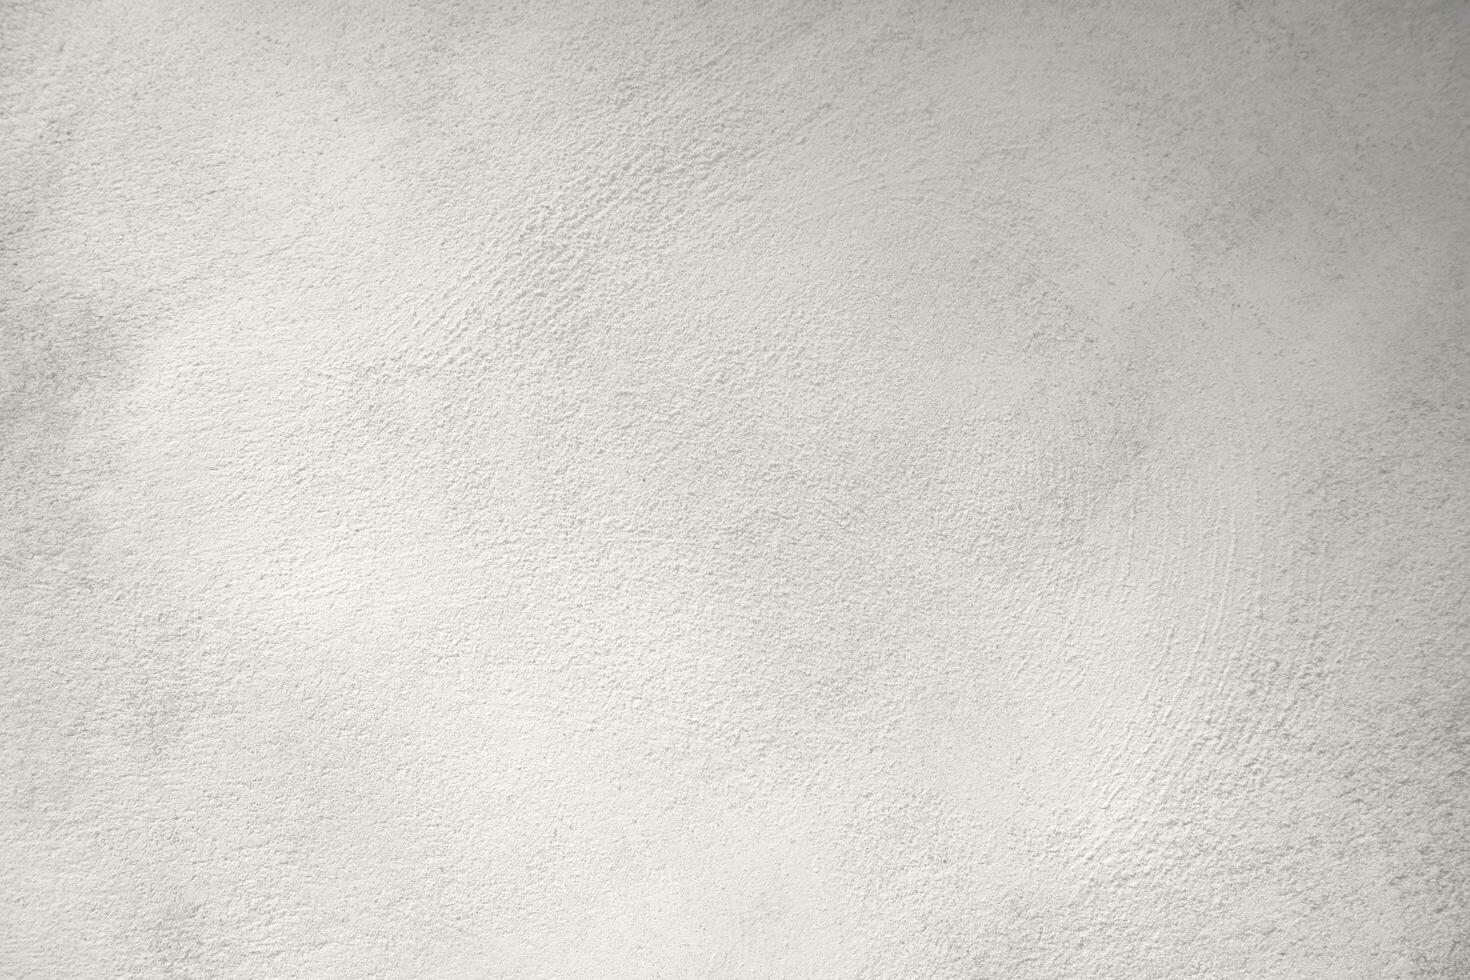 Surface of the White stone texture rough, gray-white tone. Use this for wallpaper or background image. There is a blank space for text cement wall. photo